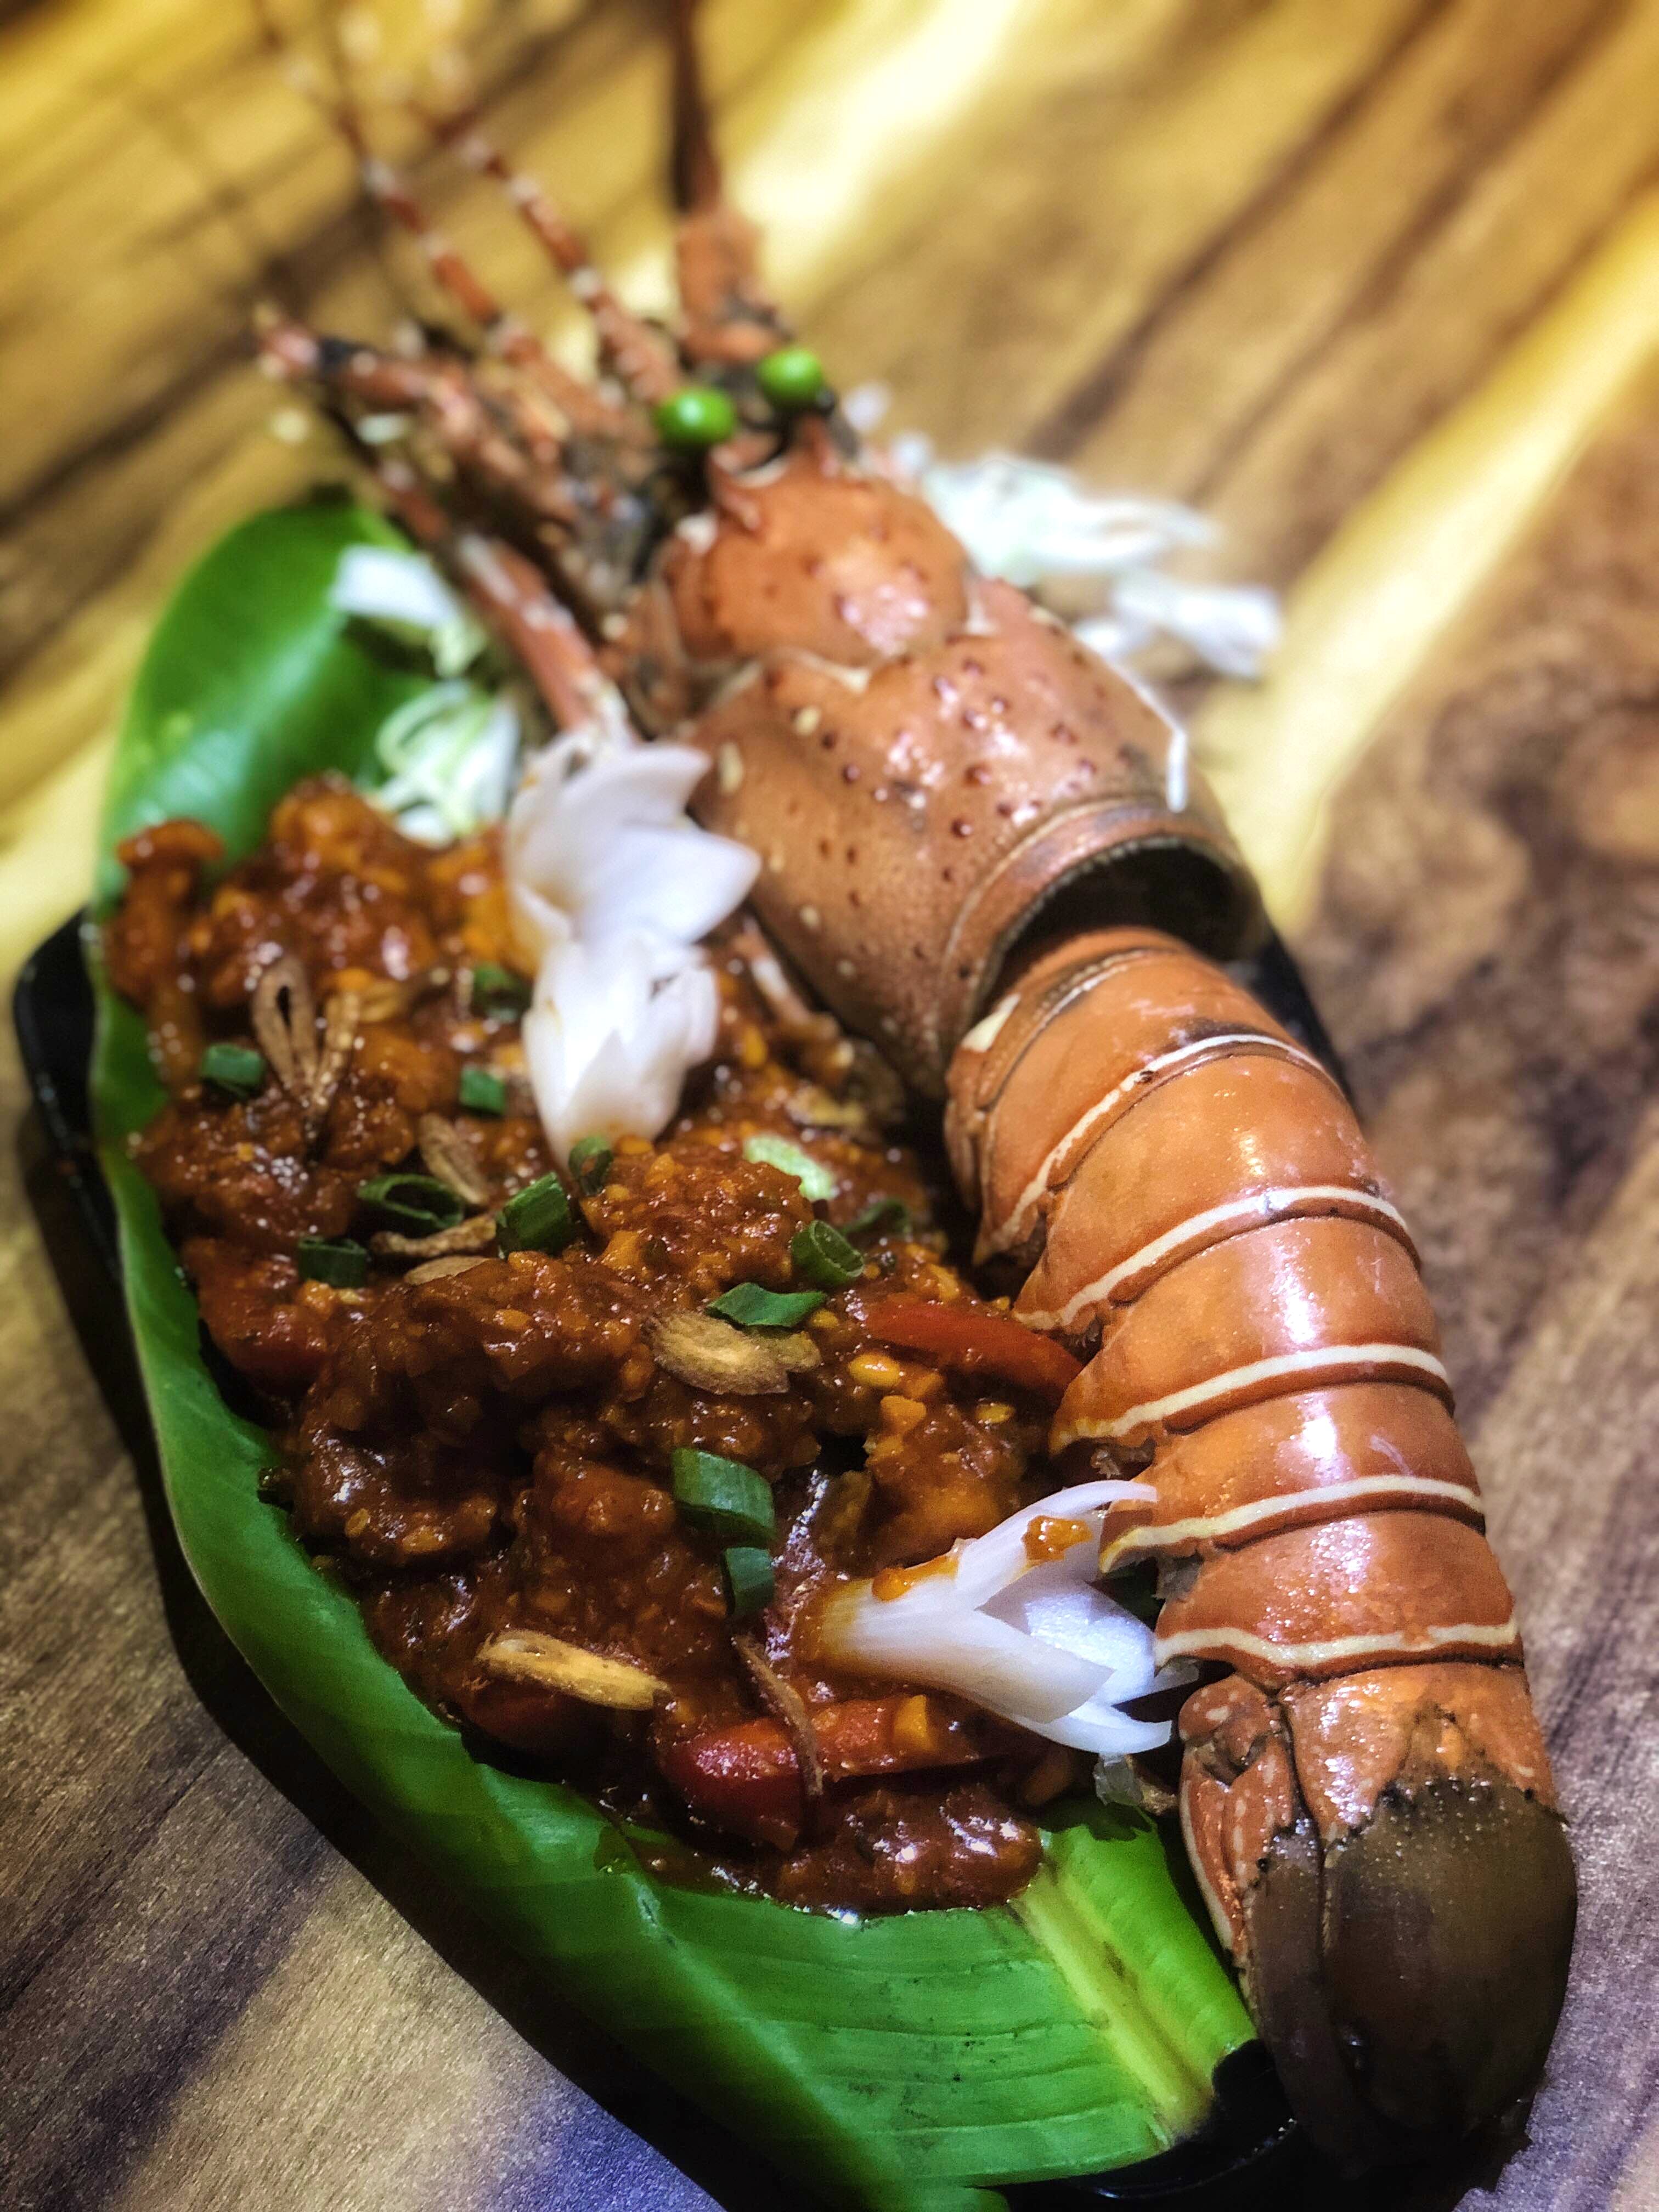 Food,Dish,Cuisine,Lobster,Ingredient,Recipe,Delicacy,Spiny lobster,Produce,Cambodian food